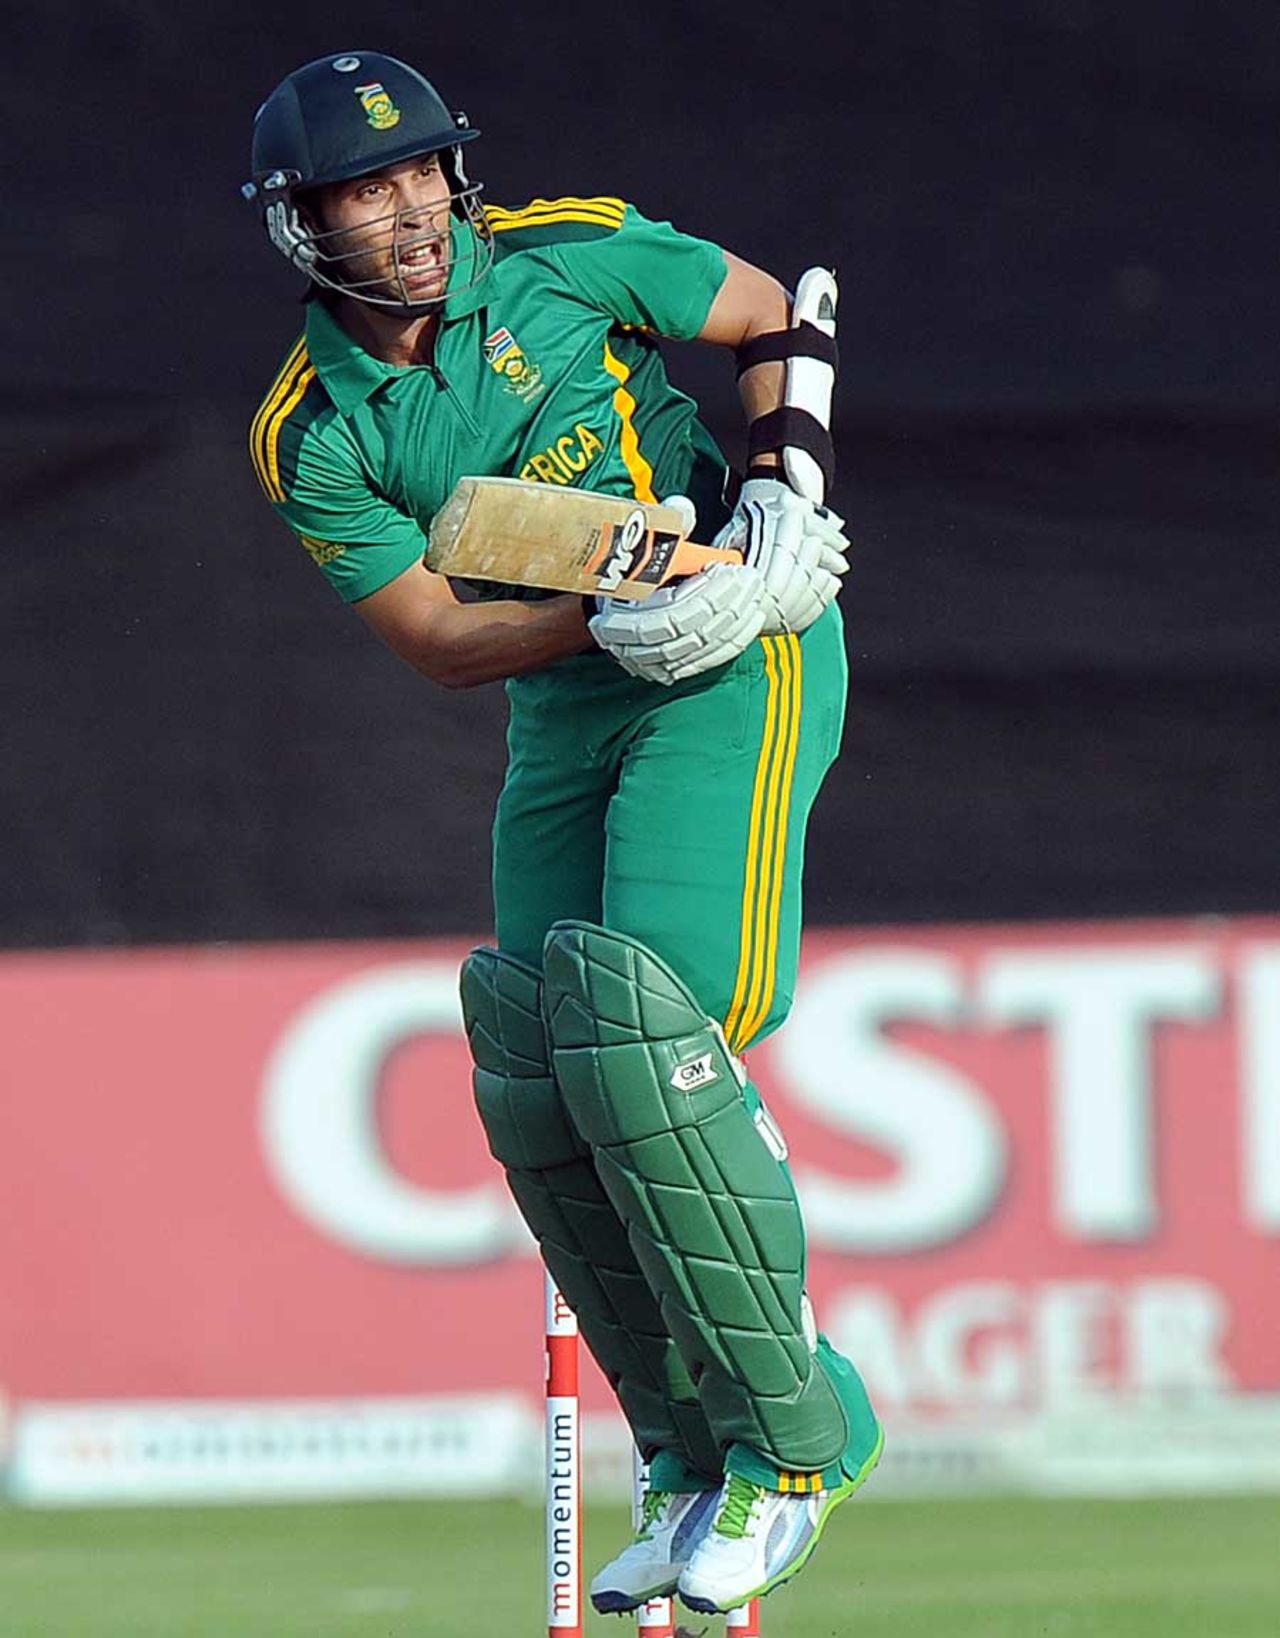 Farhaan Behardien added 87 for the fourth wicket with AB de Villiers, South Africa v Pakistan, 5th ODI, Benoni, March 24, 2013